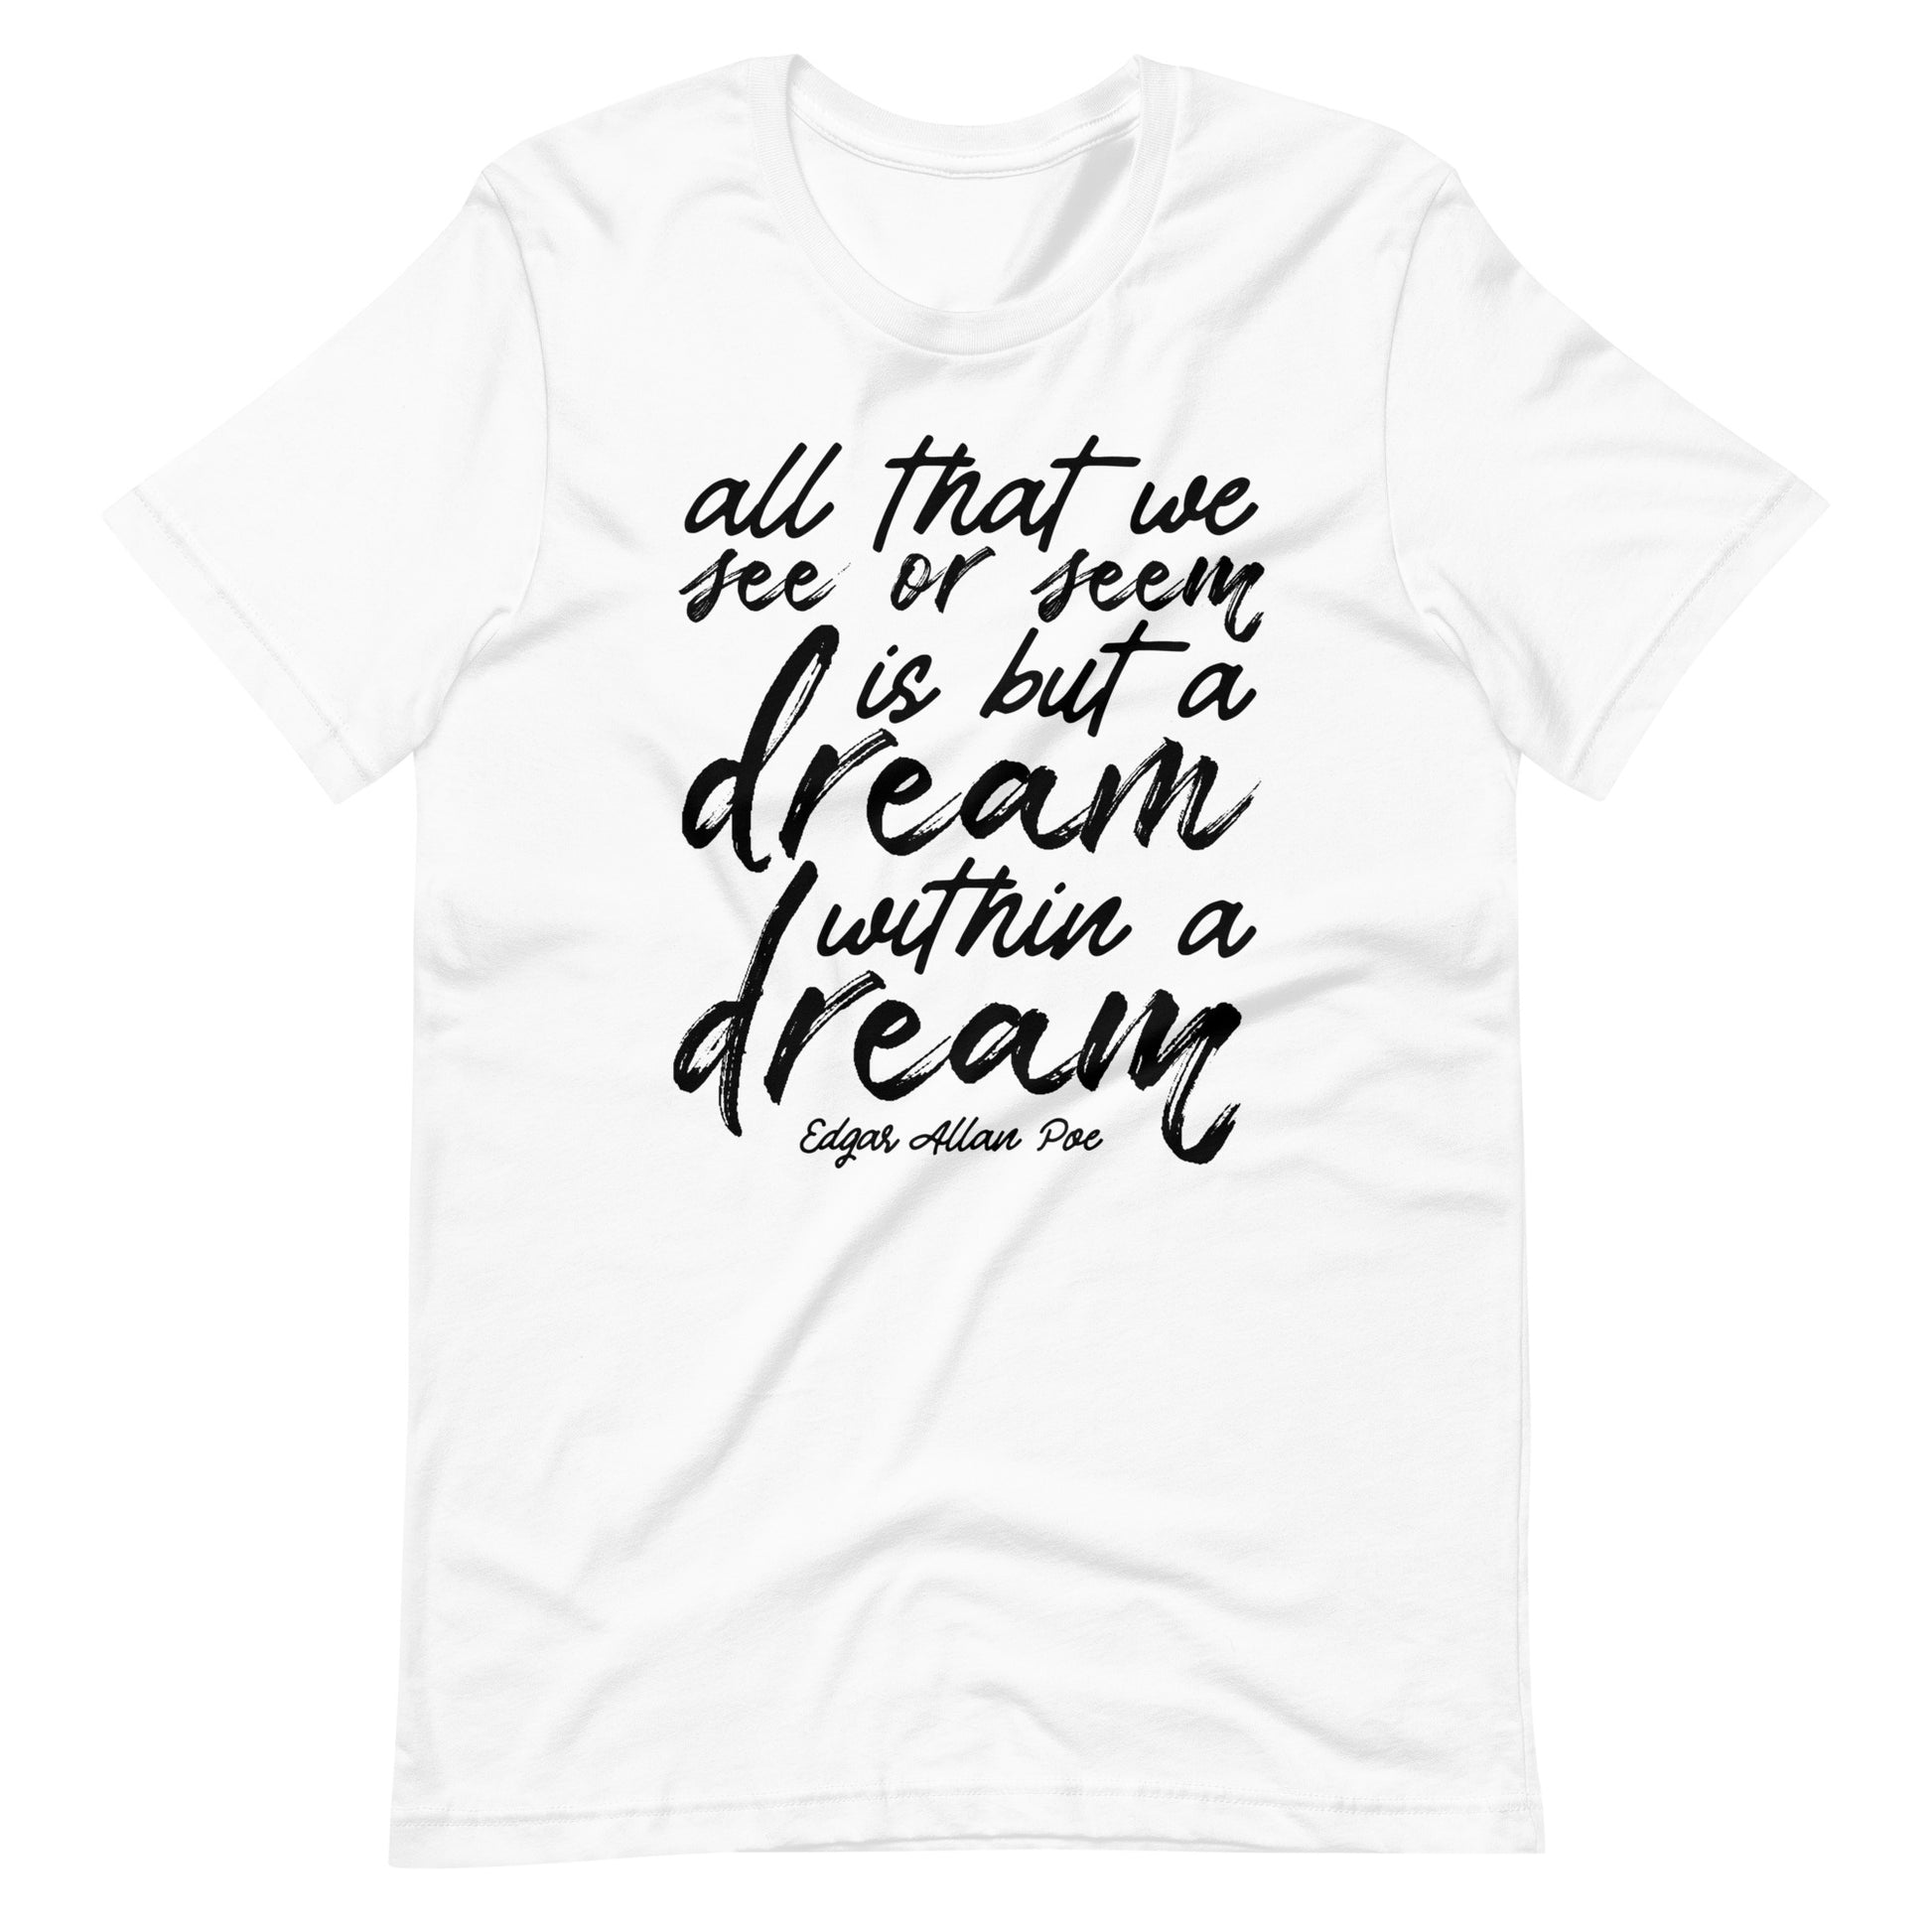 Dream Within a Dream Edgar Allan Poe Quote - Men's t-shirt - White Front